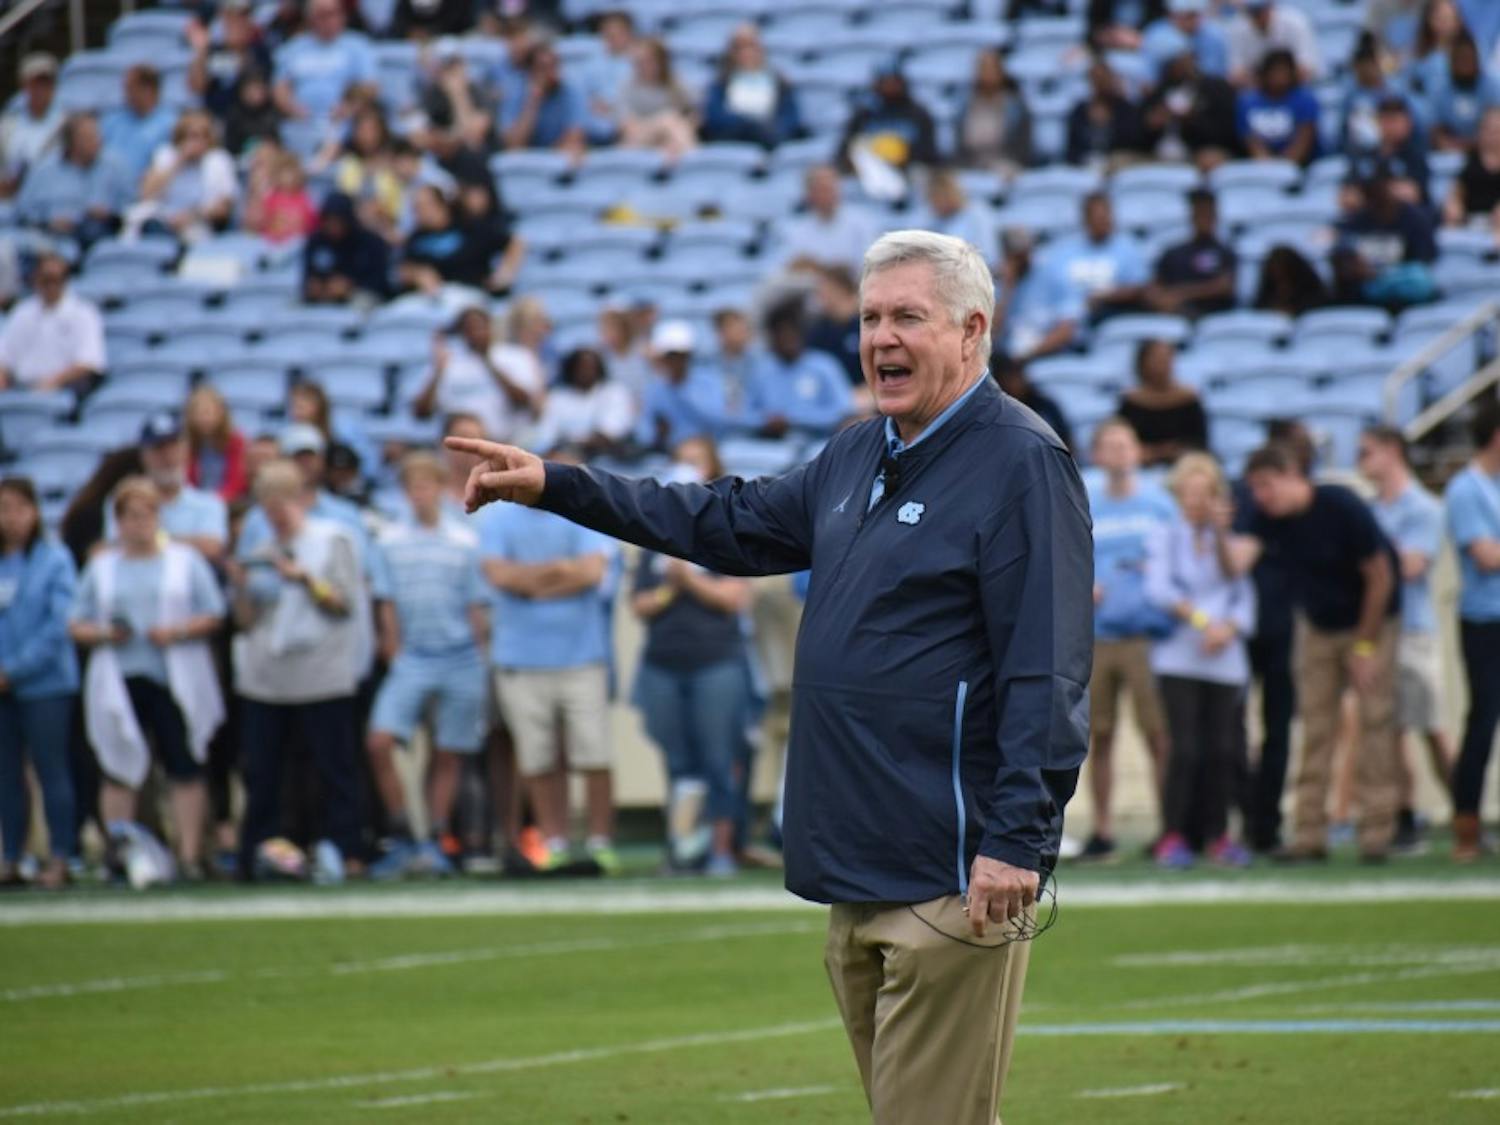 UNC football coach Mack Brown observes his team during the Spring Football Game on April 13, 2019 in Kenan Stadium. The Carolina team defeated the Tar Heel team 25-10.